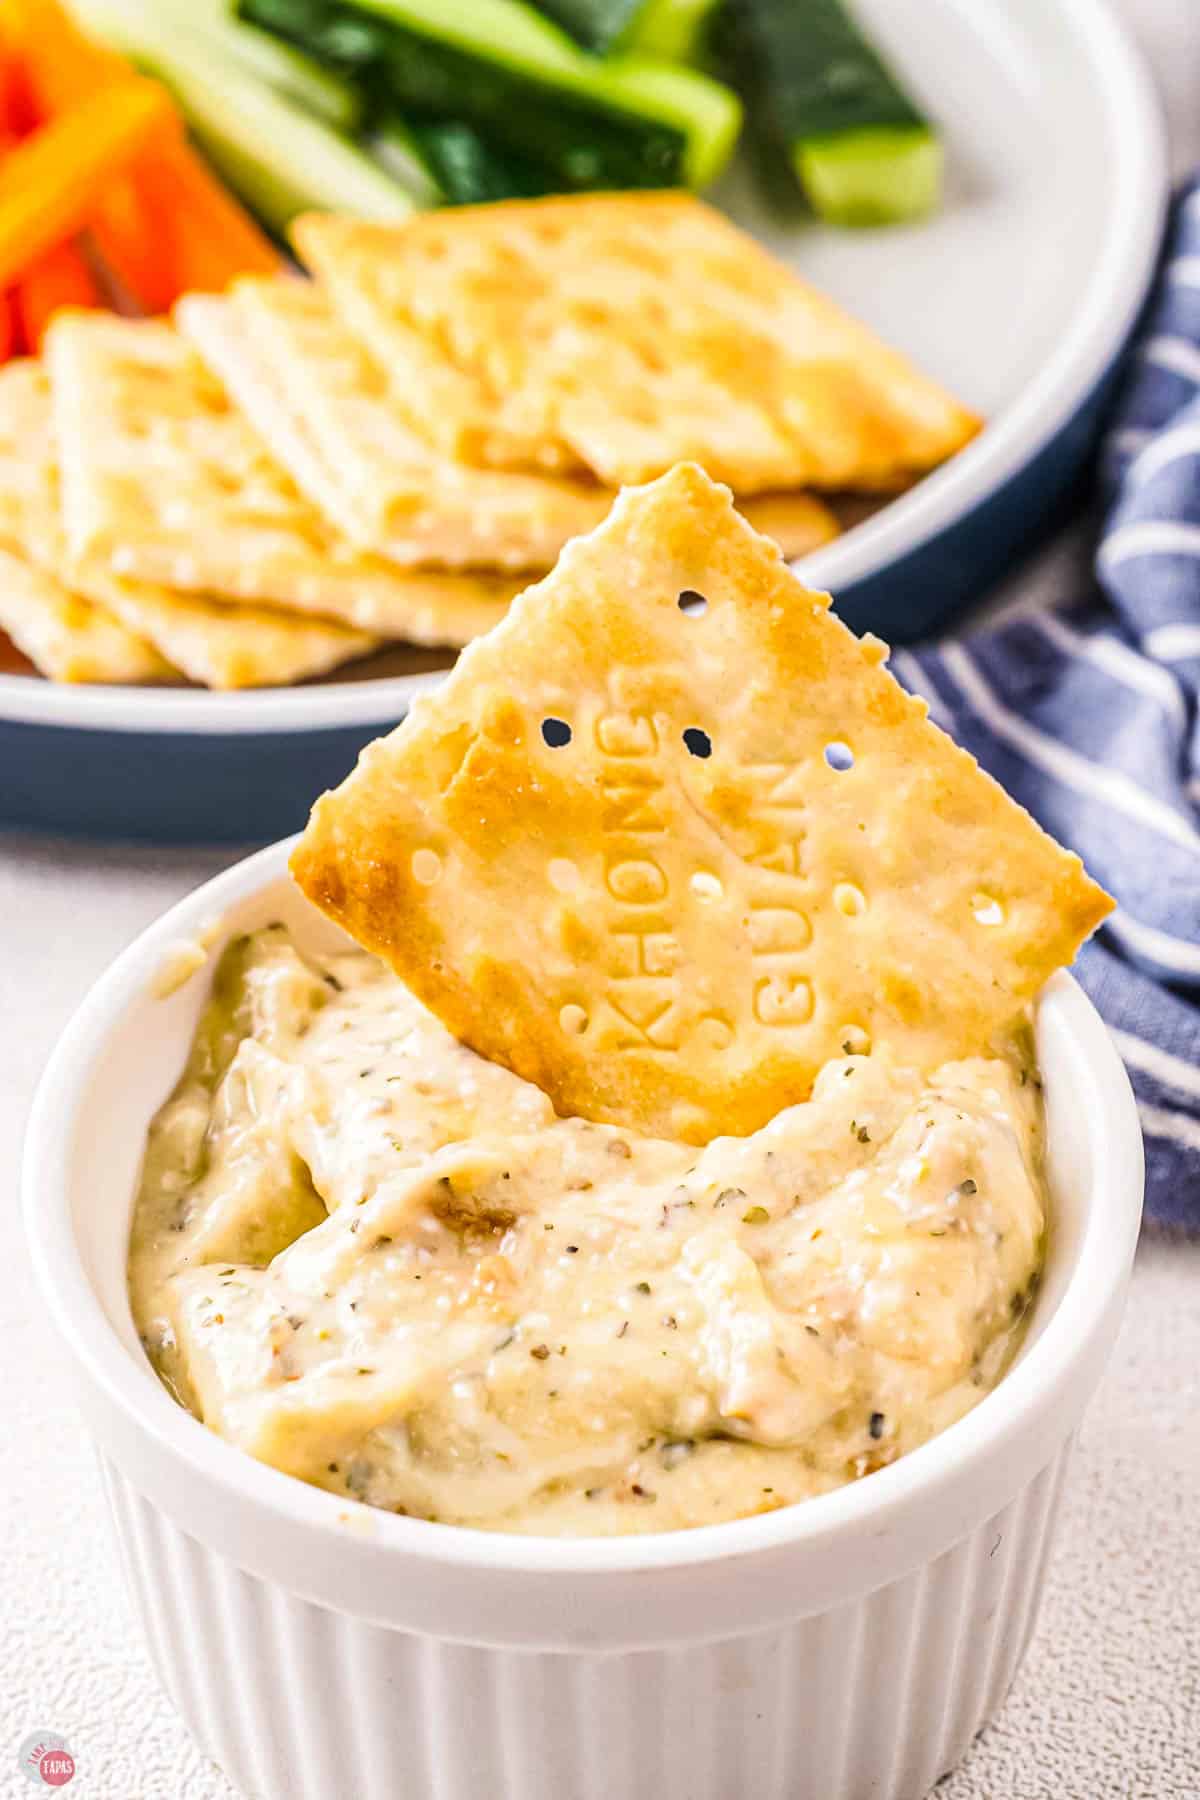 garlic dip with crackers